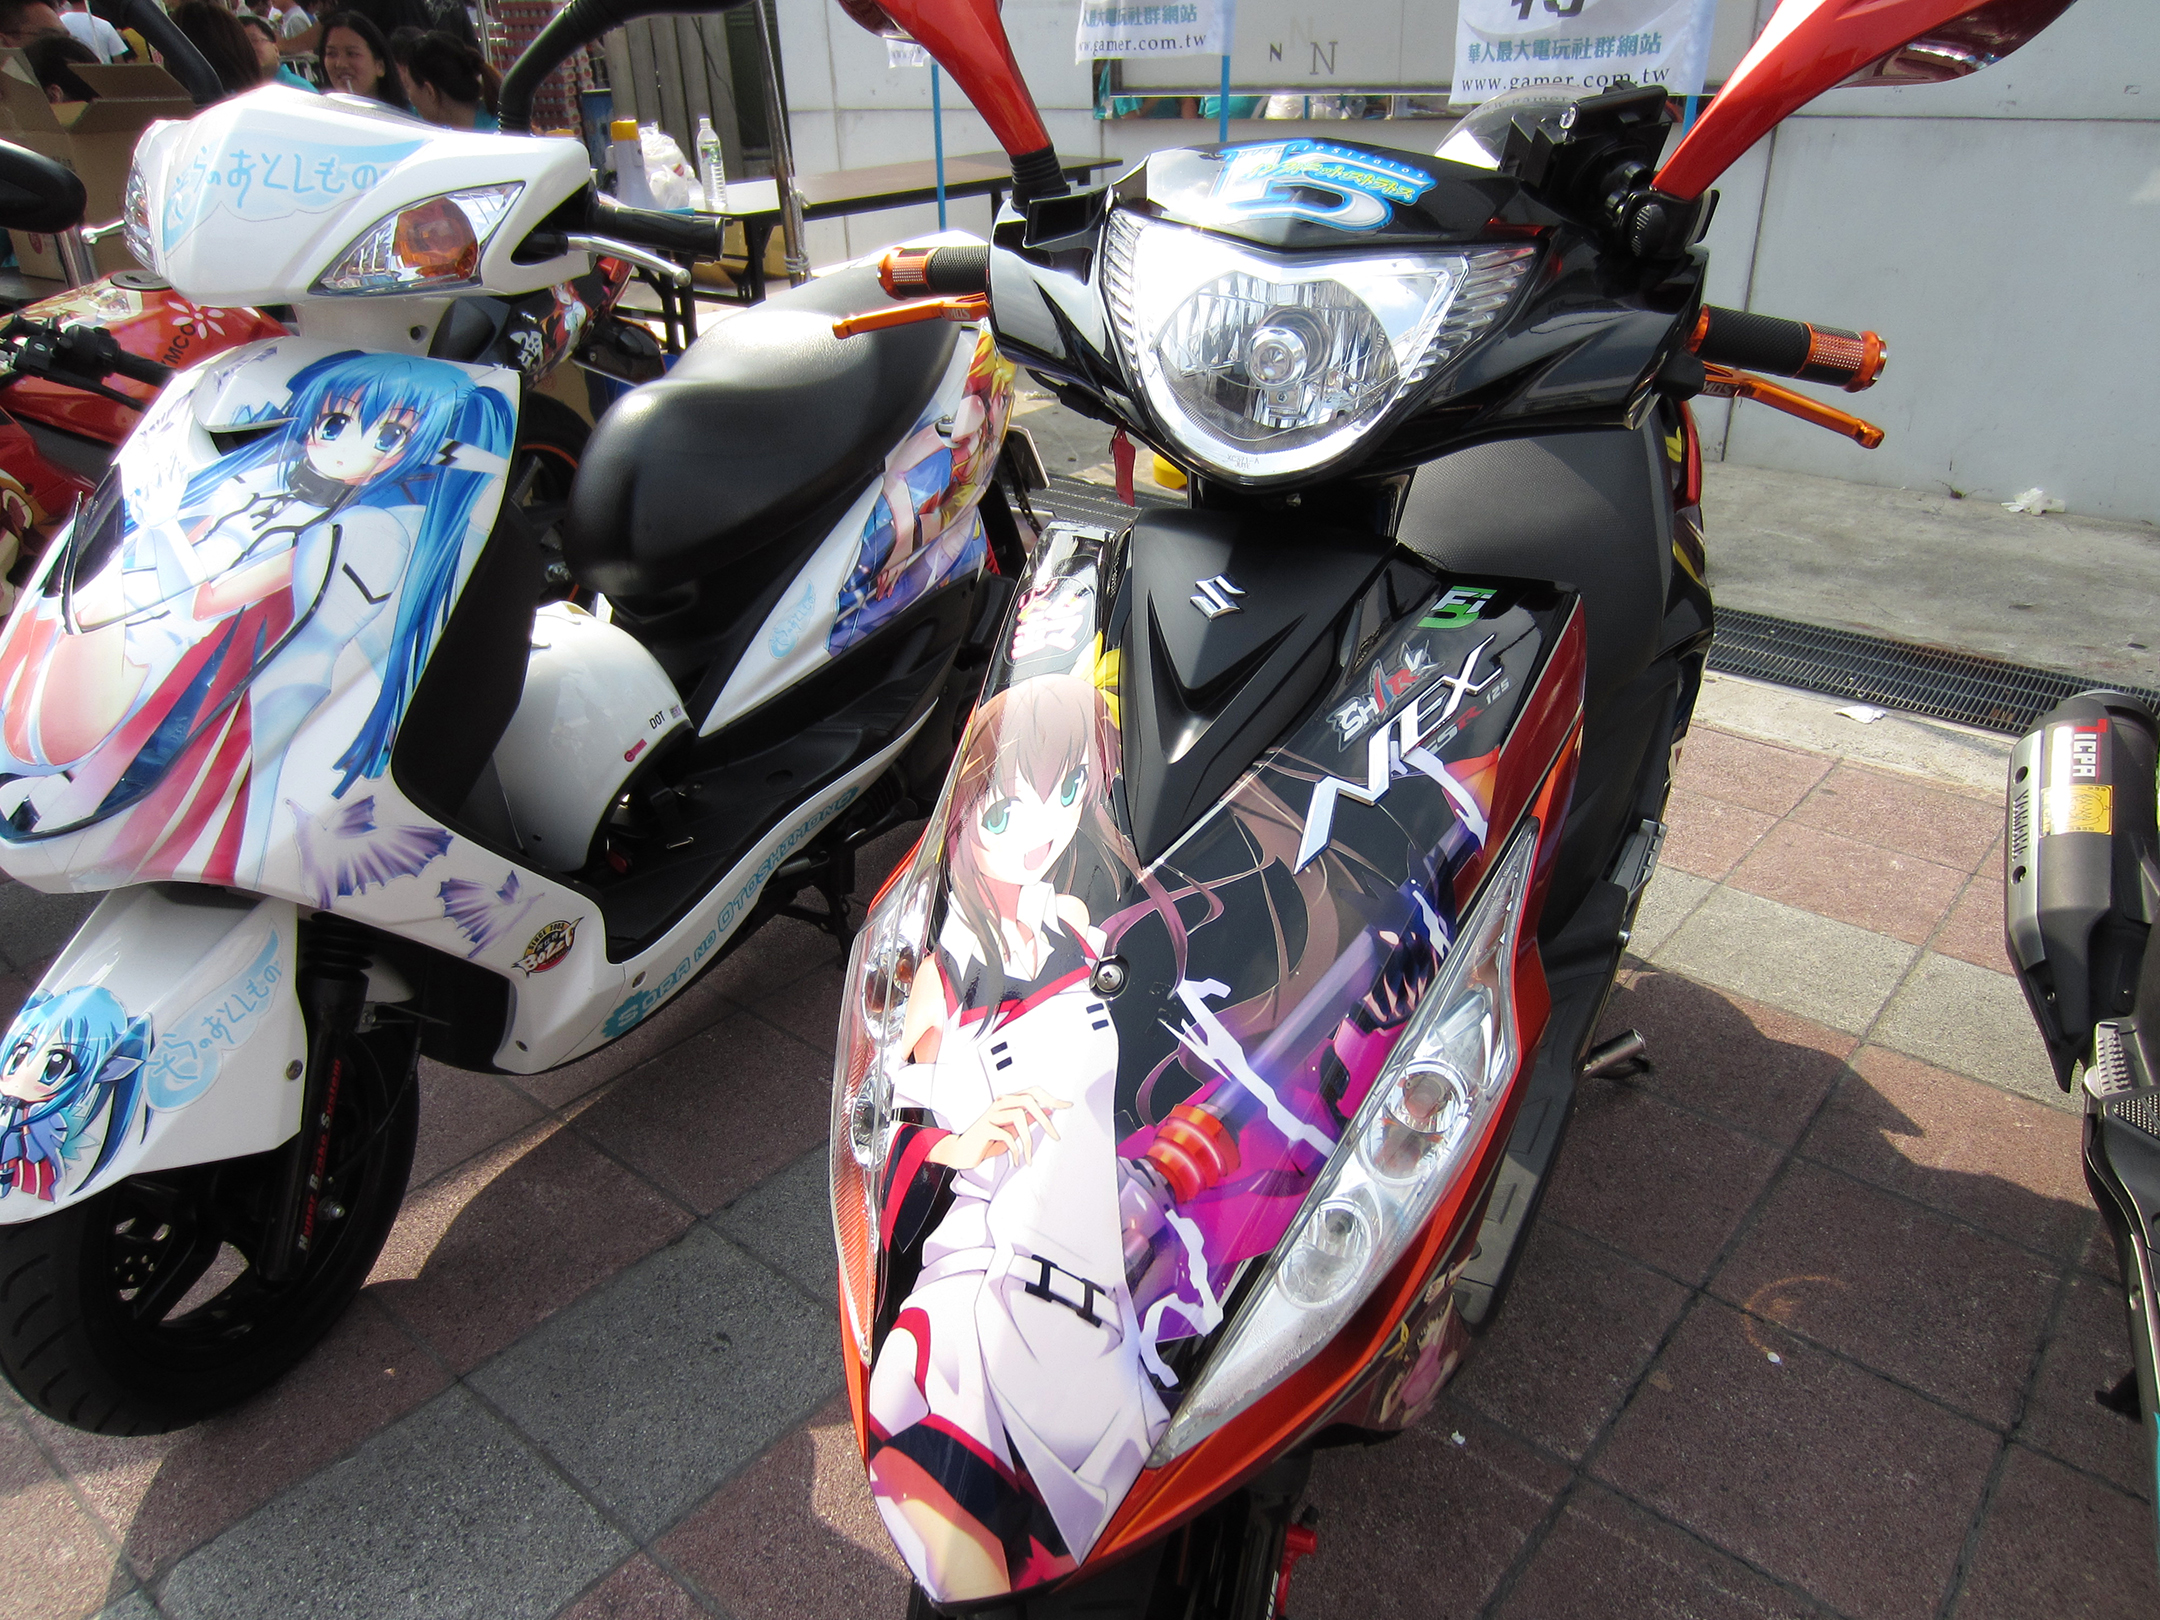 two motorcycles are painted with colorful designs on them